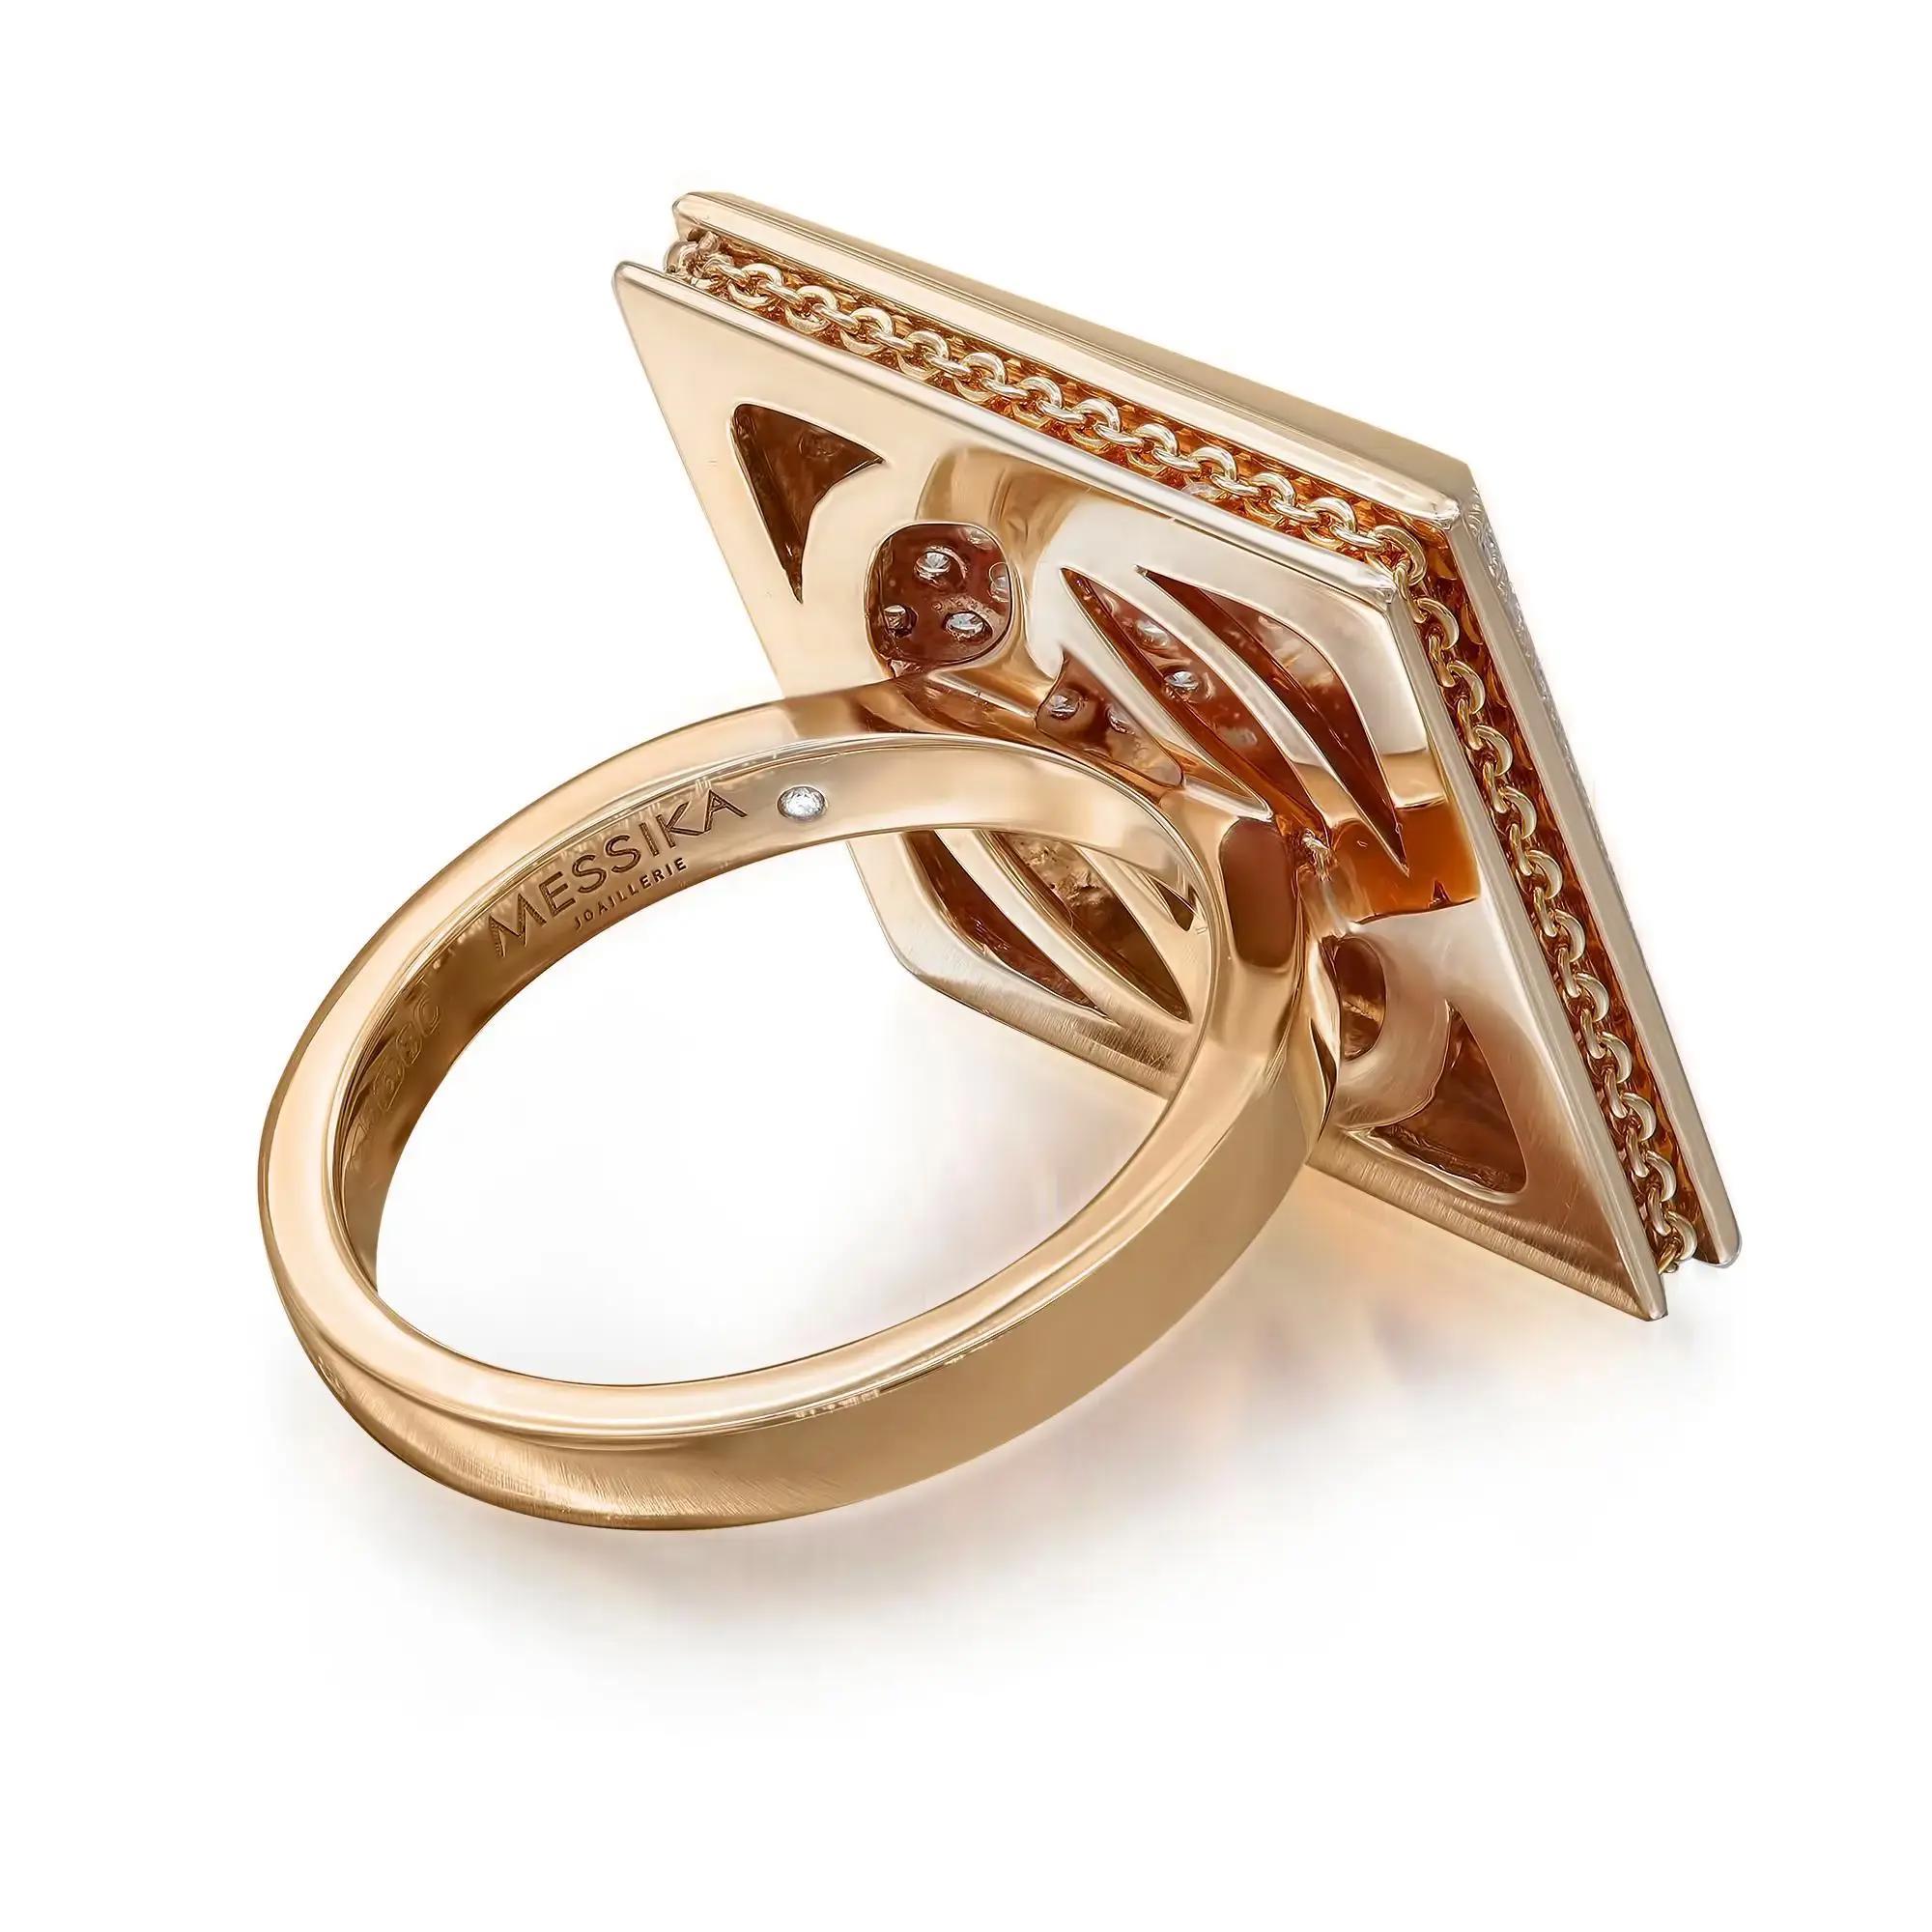 This bold Messika Spiky diamond statement ring features a pyramid adorned with round brilliant cut diamonds weighing 1.11 carat on opposite sides. Crafted in 18K rose gold. Messika combines the timelessness of the diamond with a modern touch in a